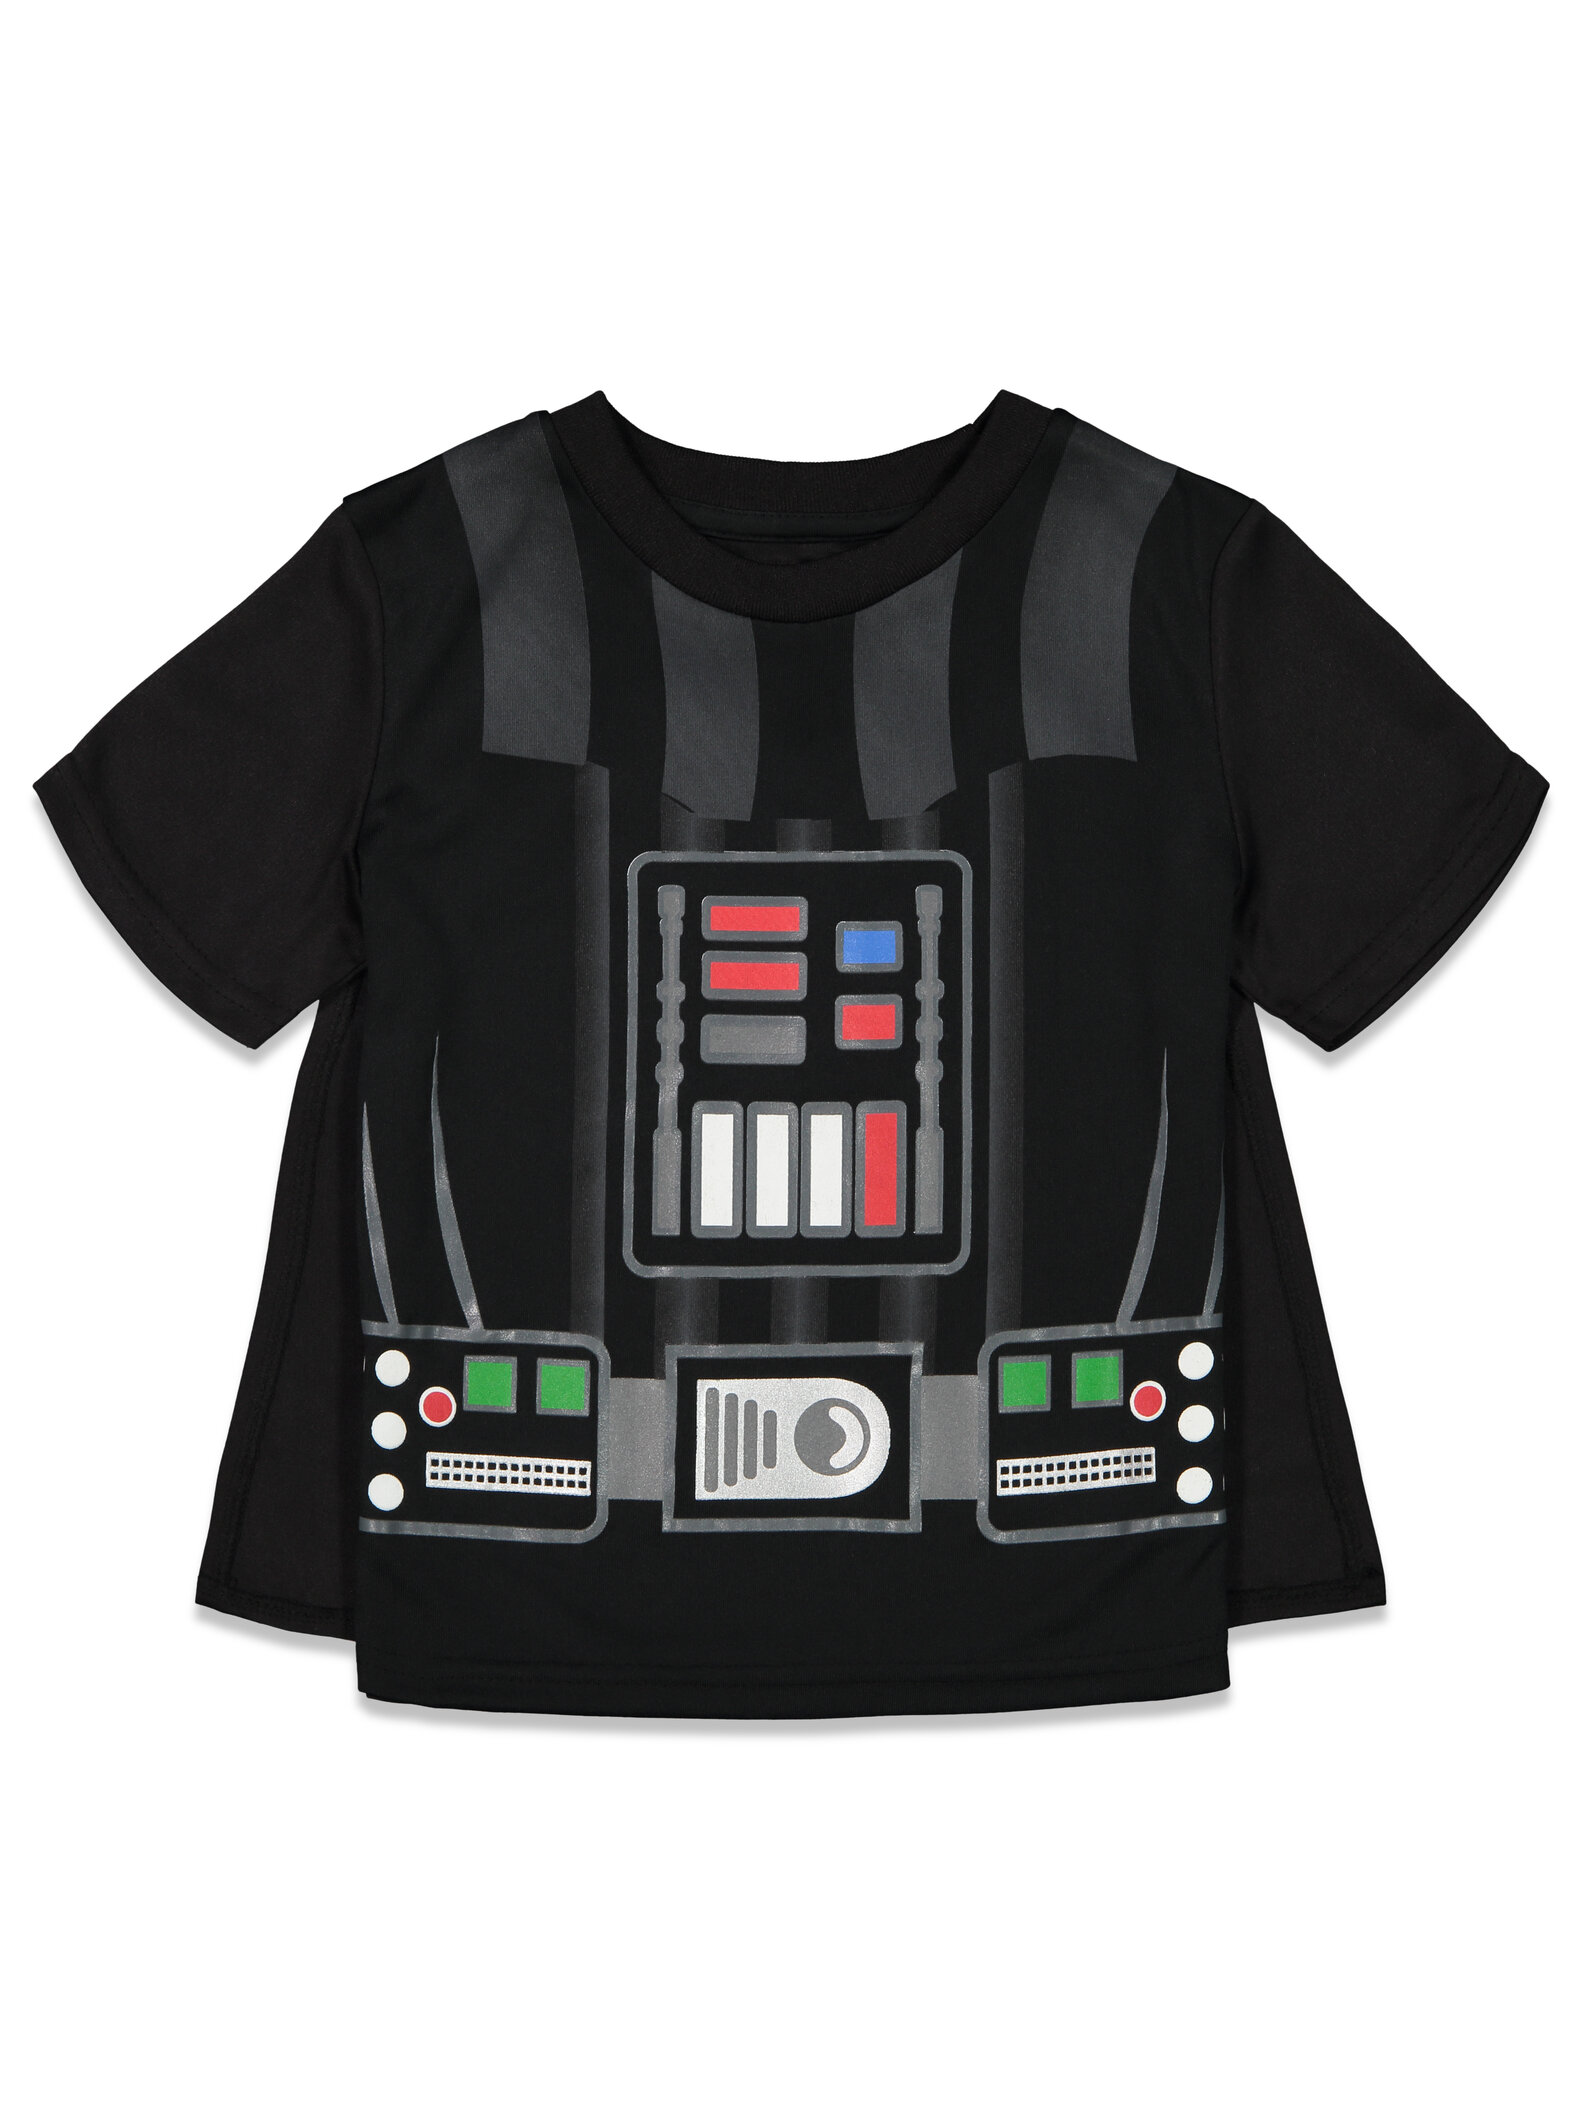 Star Wars Darth Vader Toddler Boys Costume T-Shirt Shorts and Cape 3 Piece Toddler to Big Kid - image 3 of 5